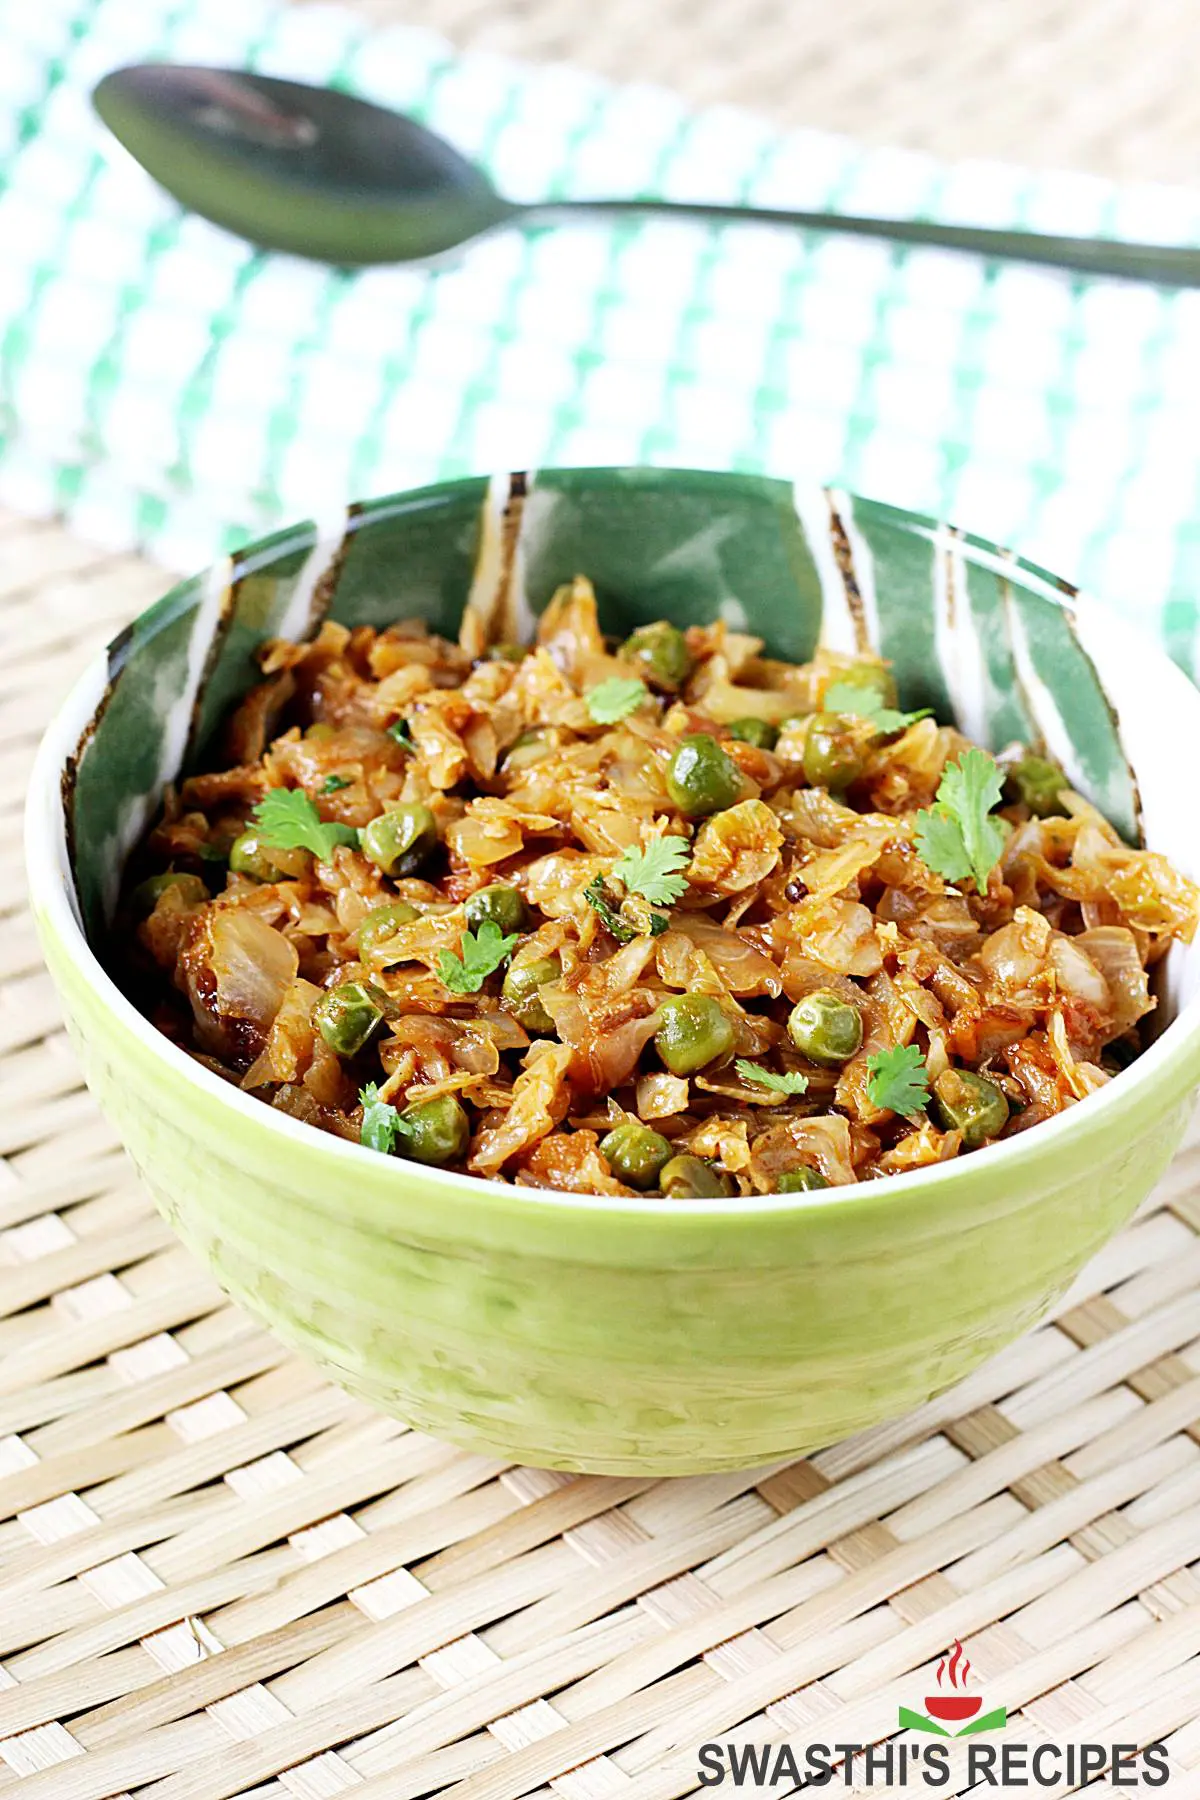 Cabbage curry recipe made with shredded cabbage and peas